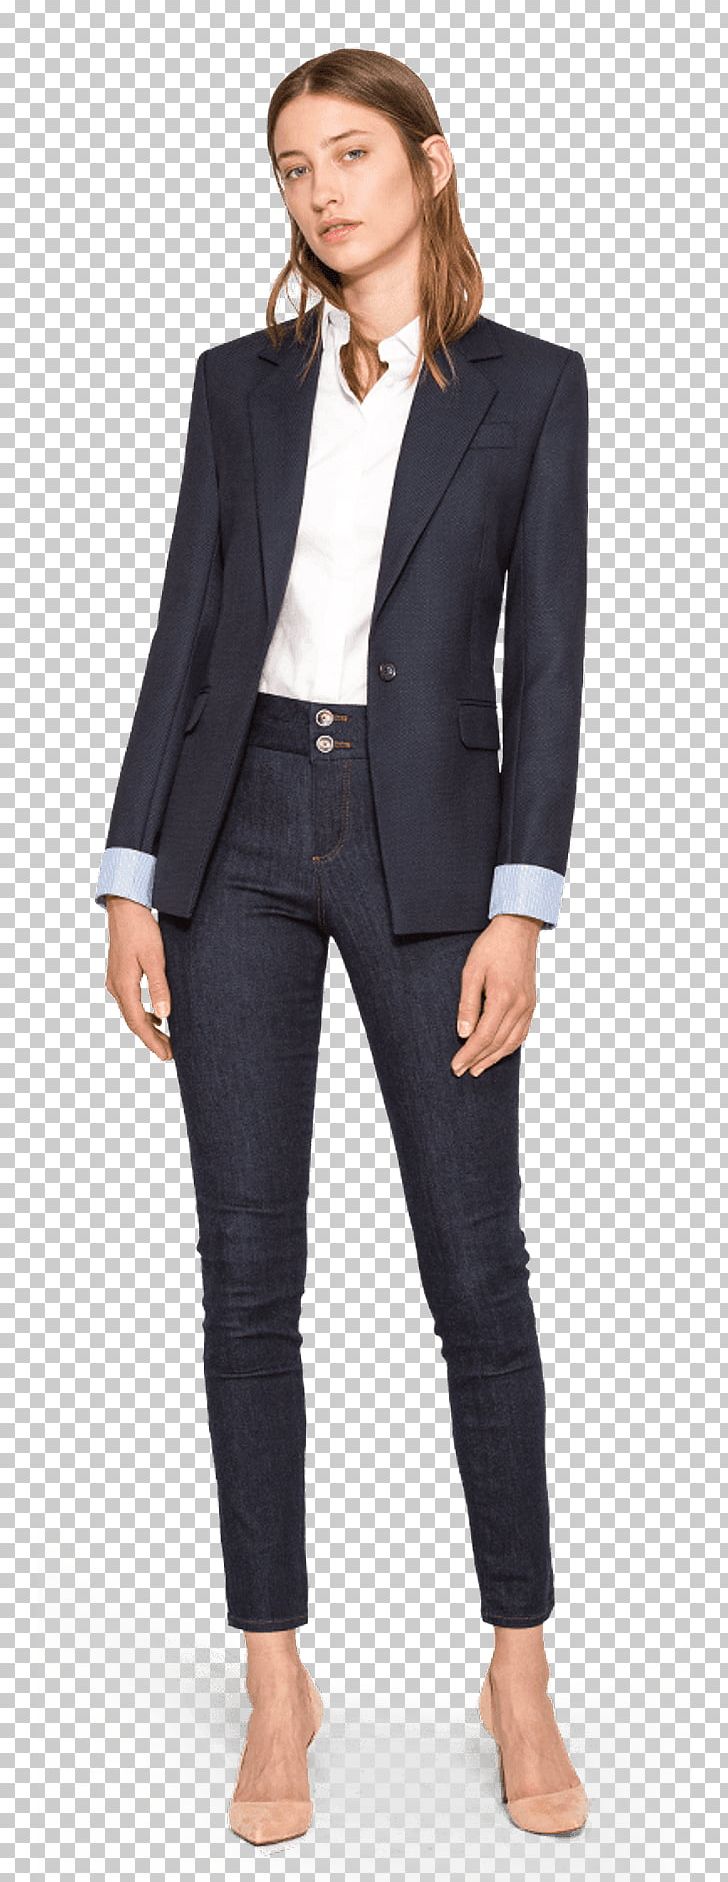 Blazer Suit Shirt Wool Jacket PNG, Clipart, Blazer, Blouse, Business, Businessperson, Clothing Free PNG Download